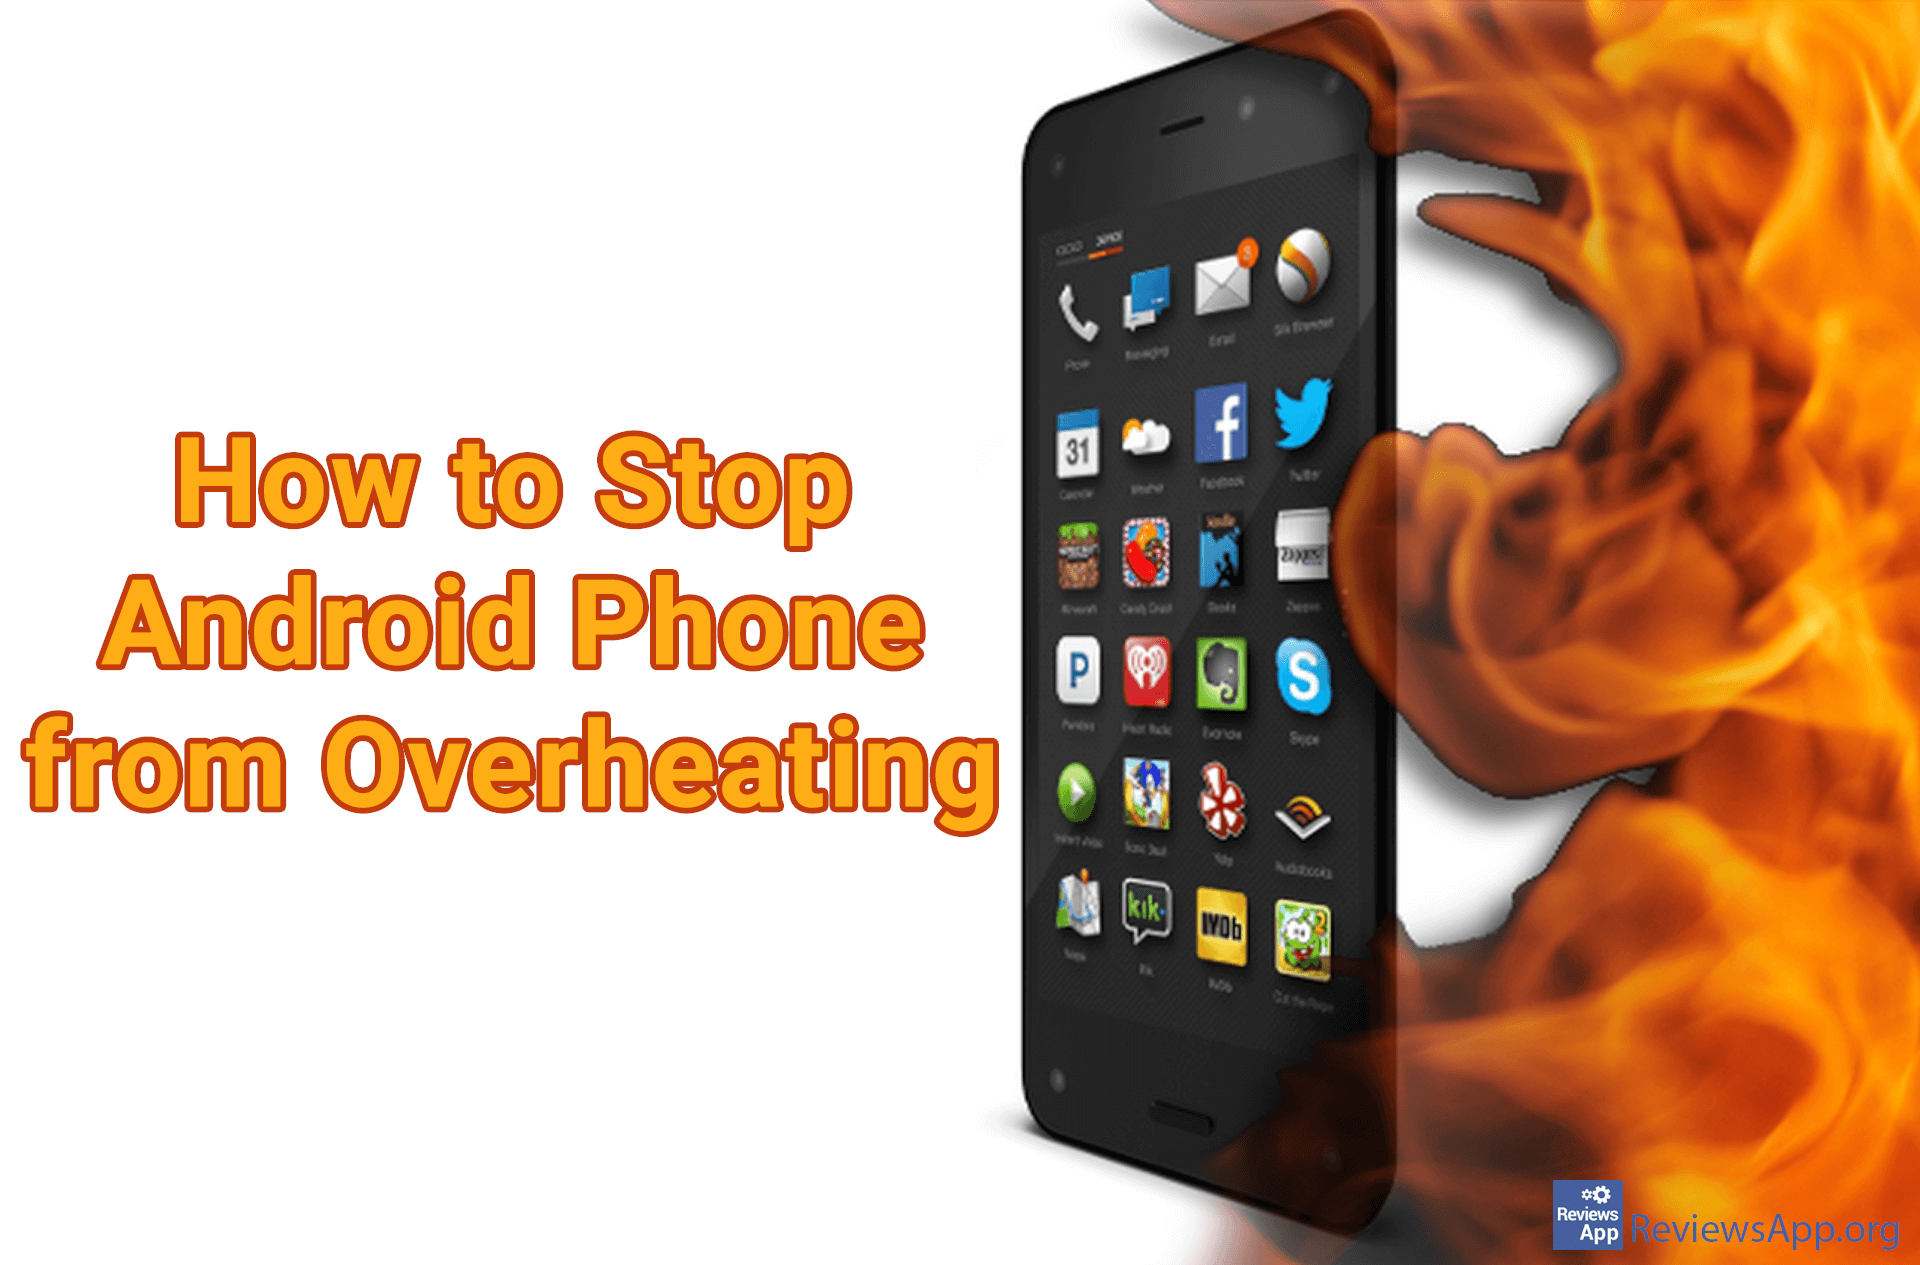 How to Stop Android Phone from Overheating